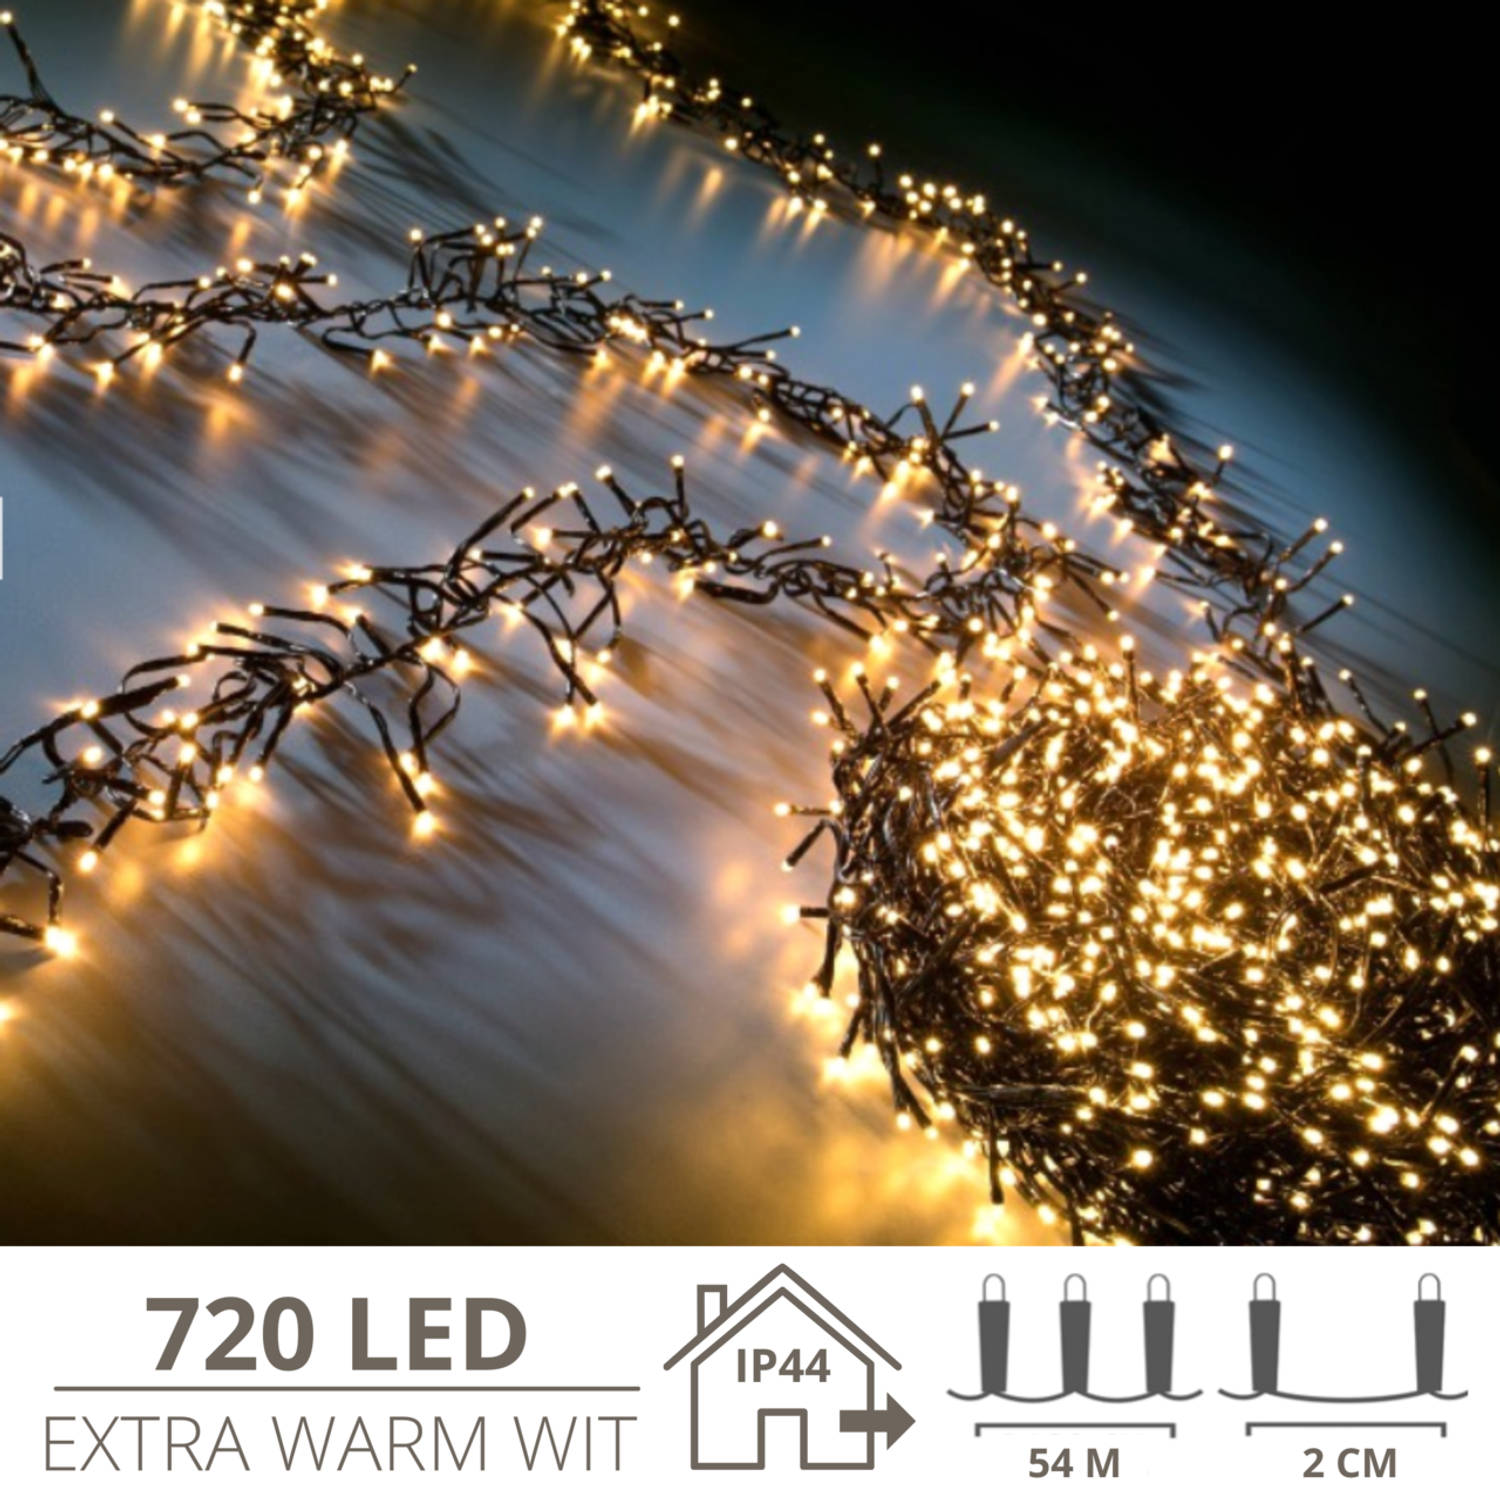 Kerstverlichting - Kerstboomverlichting - Kerstversiering - Kerst - 720 LED&apos;s - 54 meter - Extra warm wit